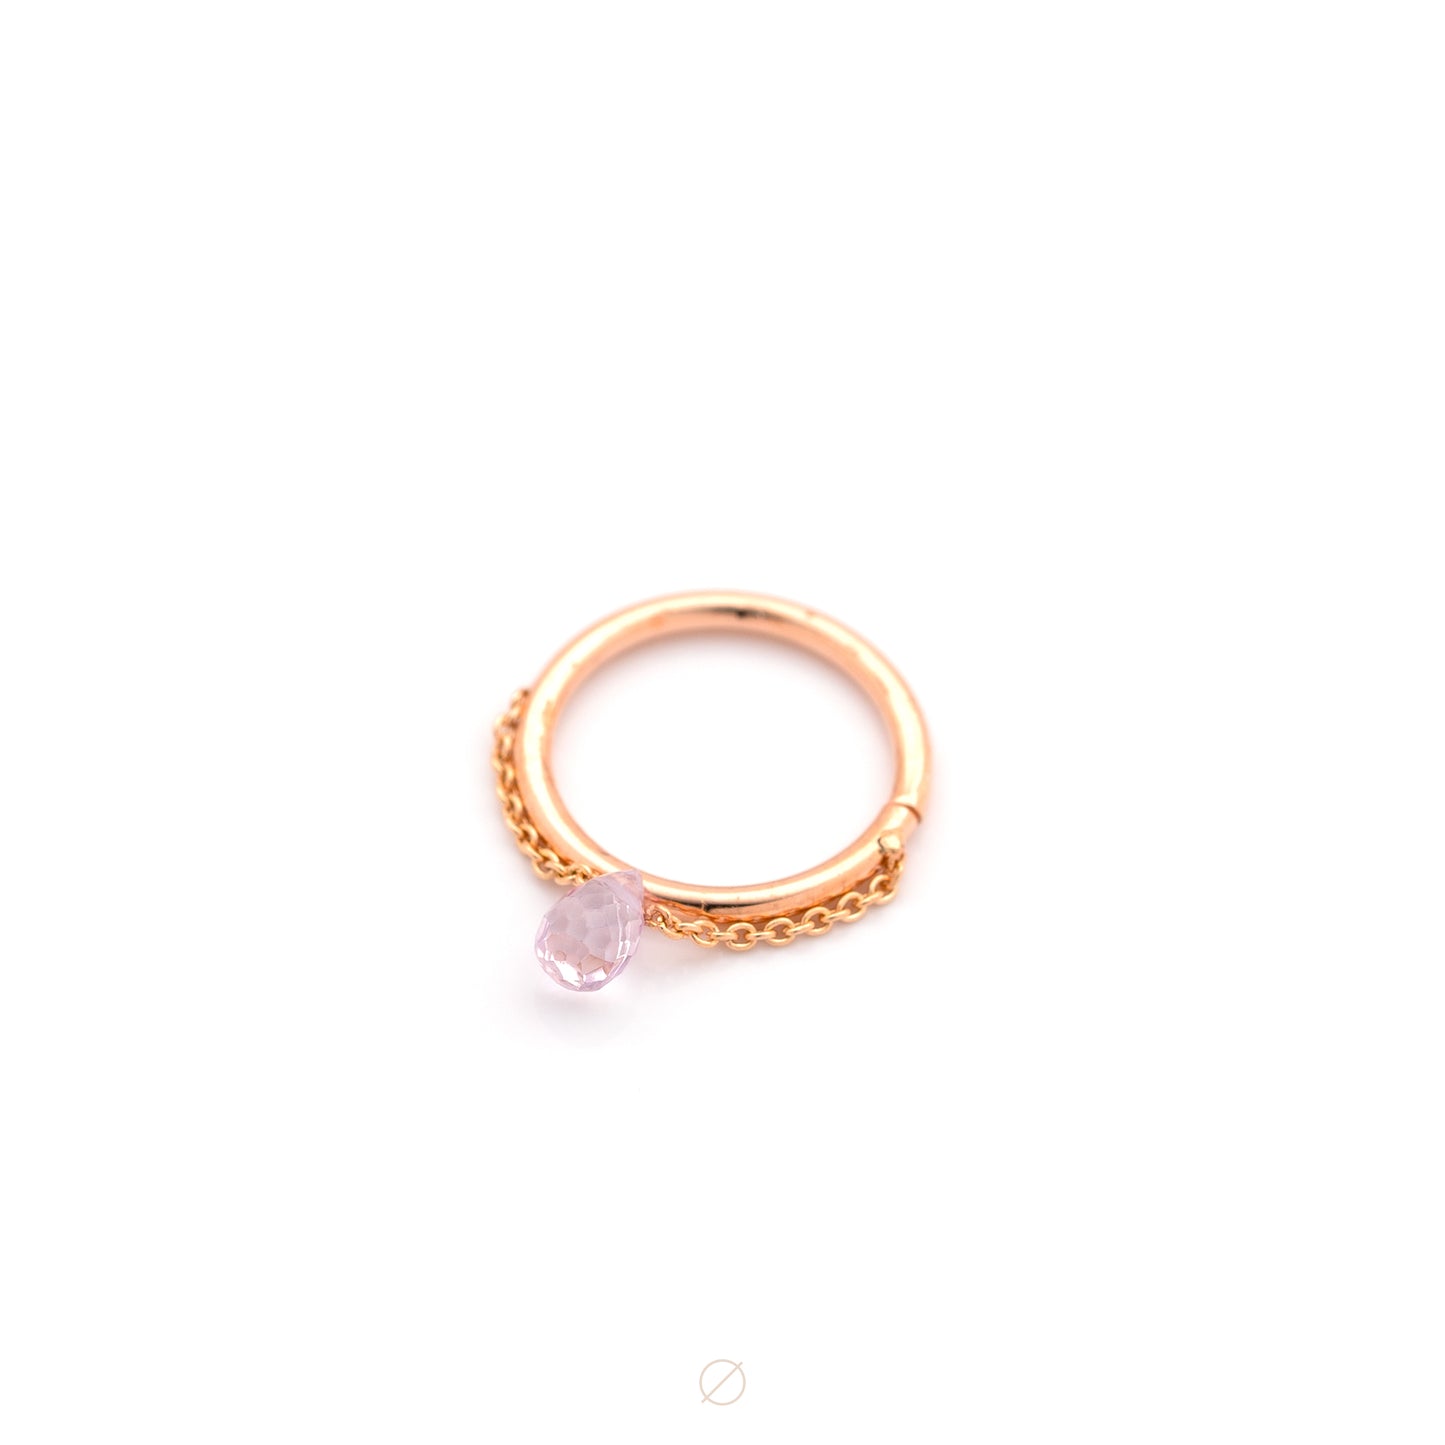 Briolette Chained Seam Ring by Pupil Hall